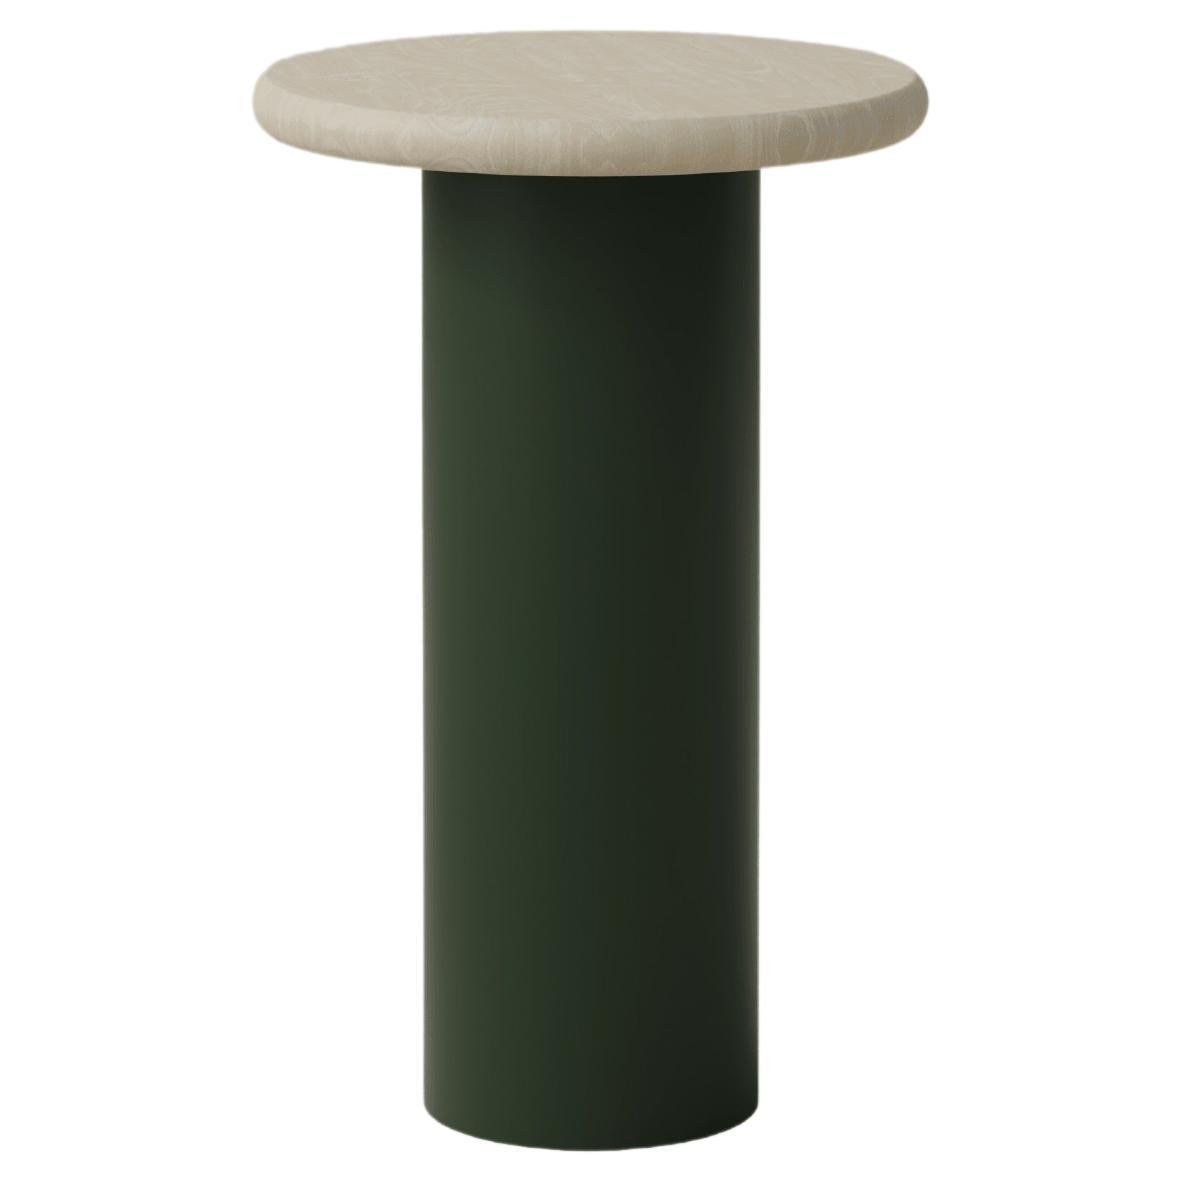 Raindrop Coffee Table, 300, Ash / Moss Green For Sale